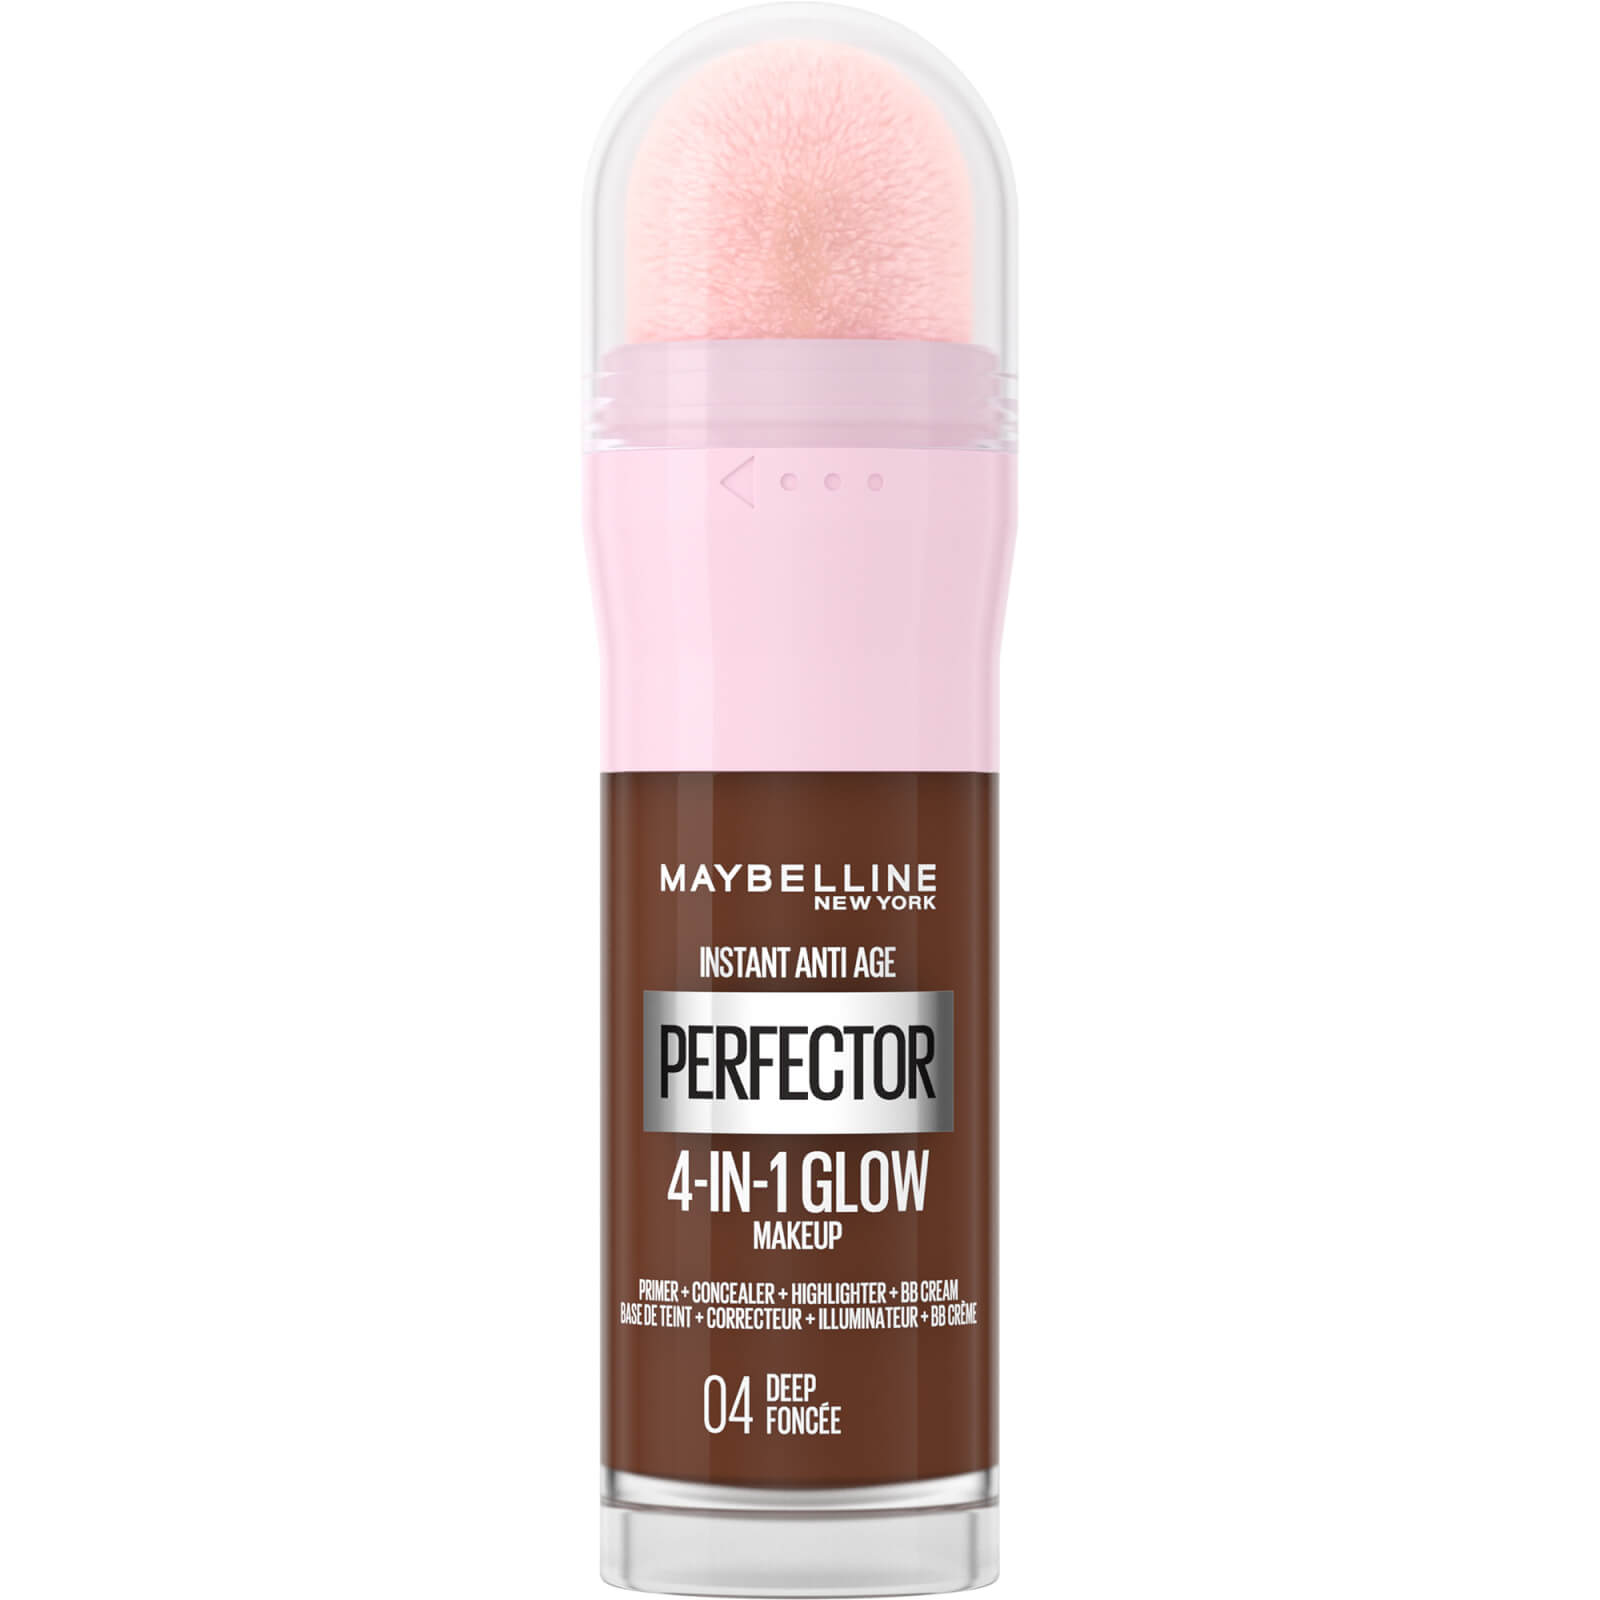 Maybelline Instant Anti Age Perfector 4-in-1 Glow Primer, Concealer, Highlighter, BB Cream 20ml (Var